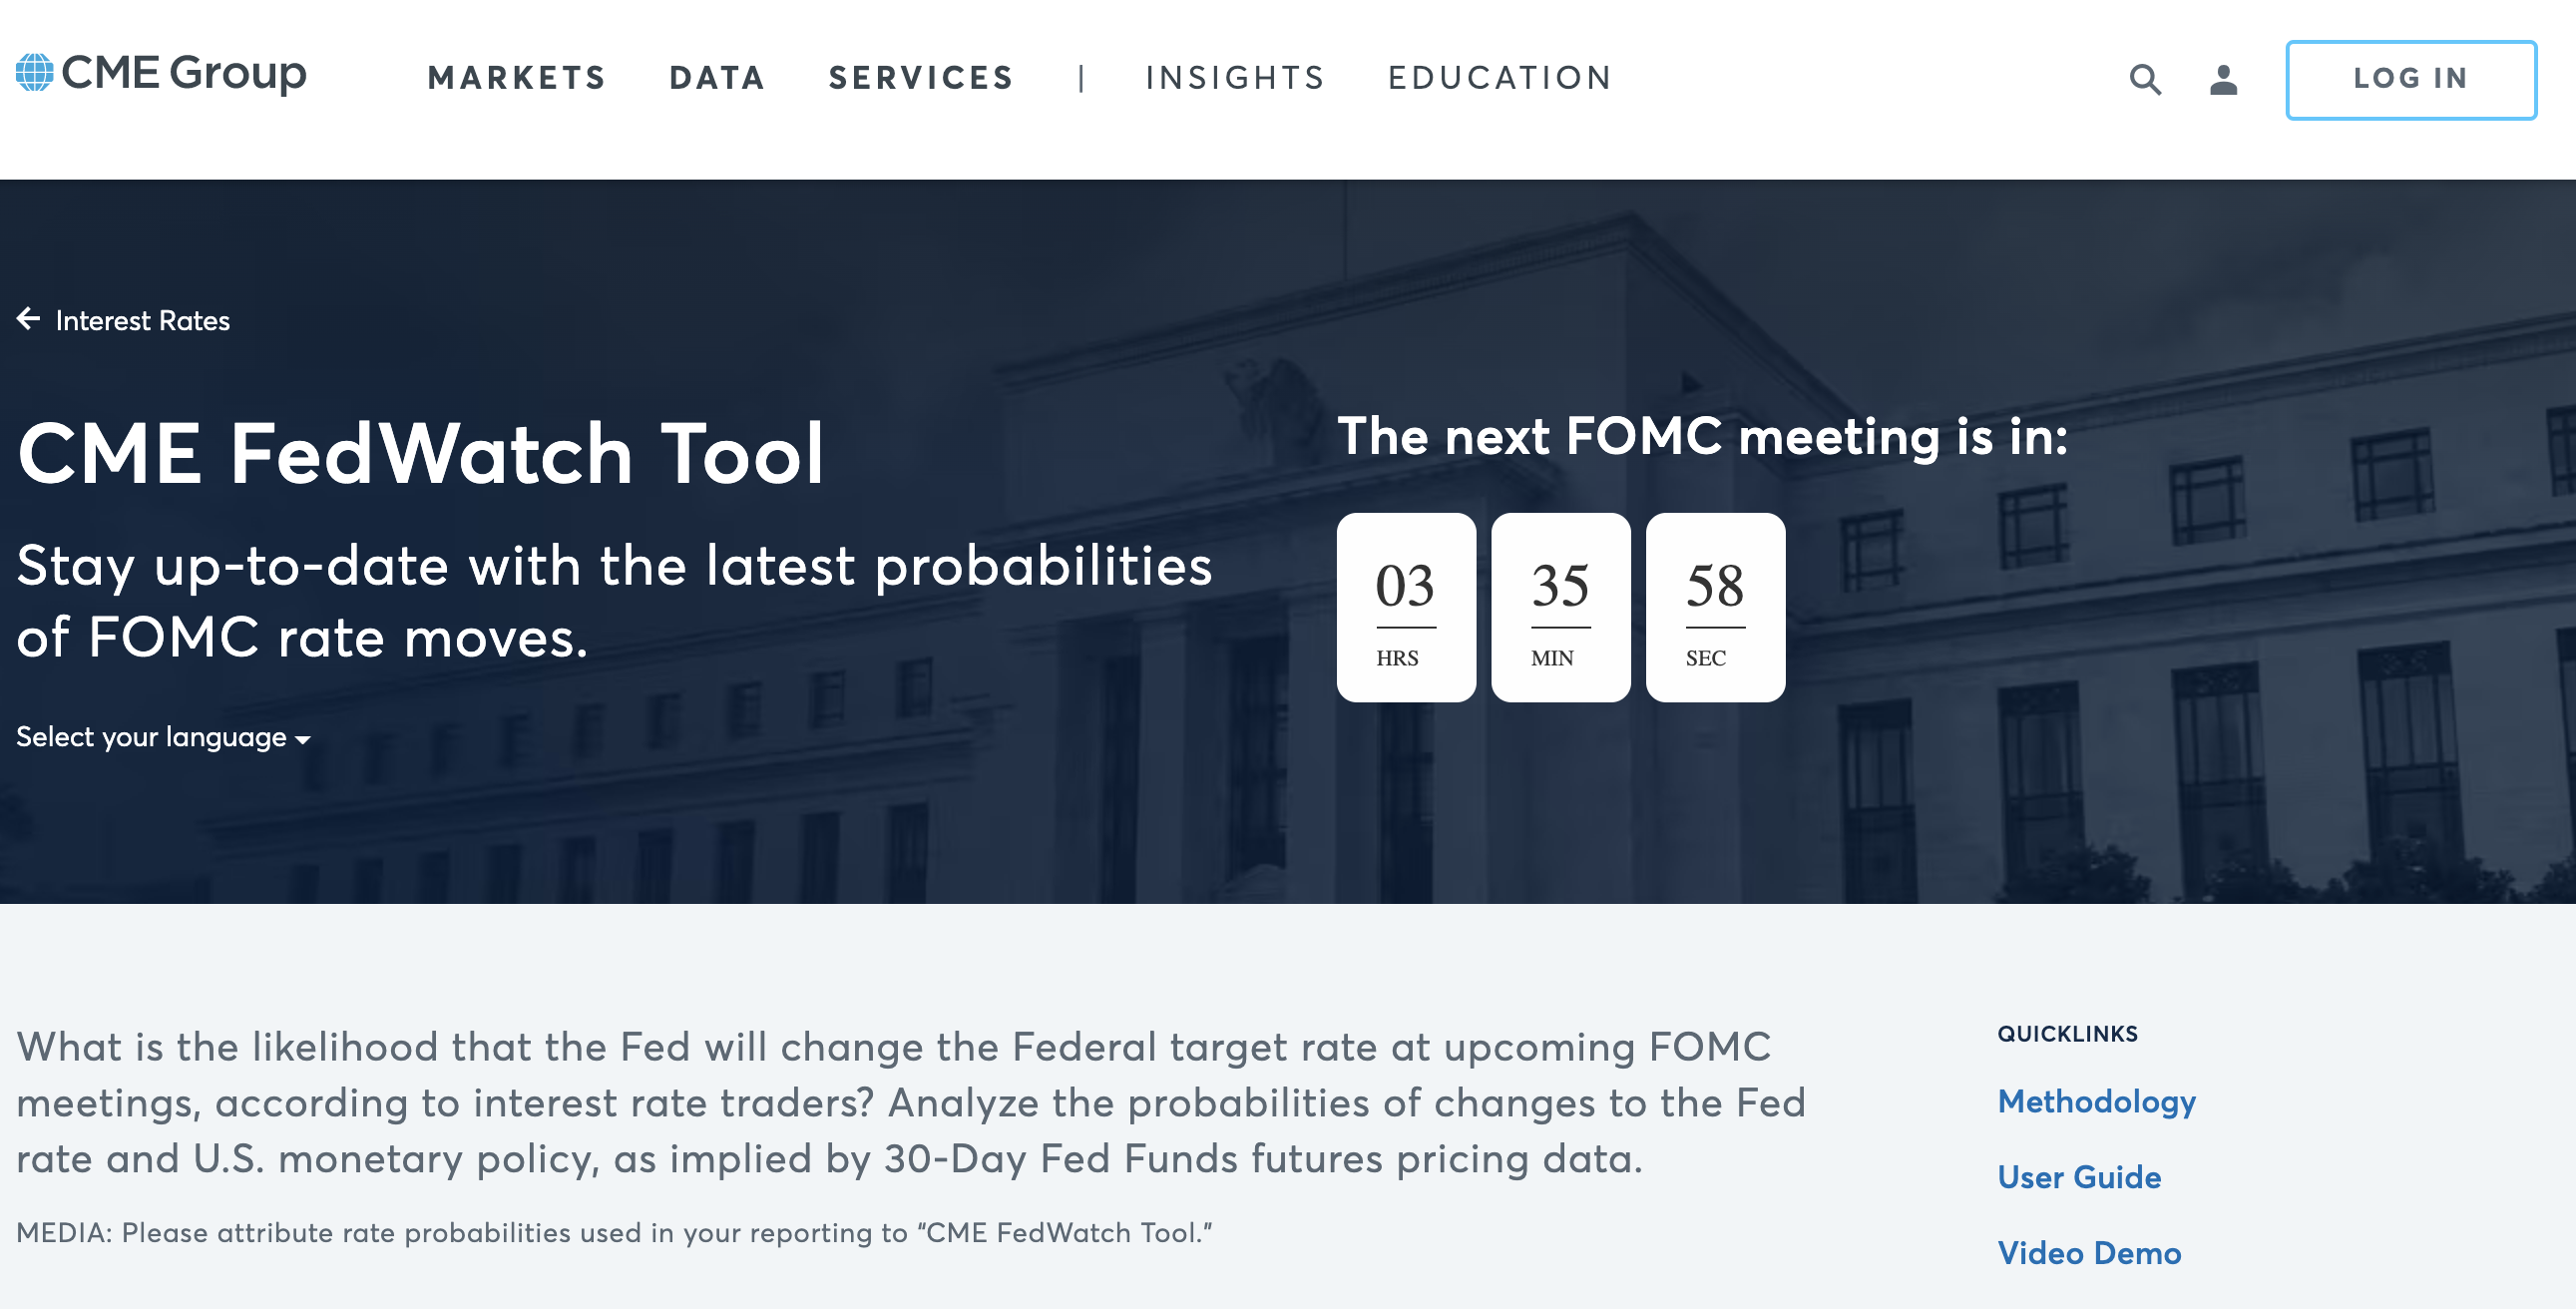 Fedwatch Tool